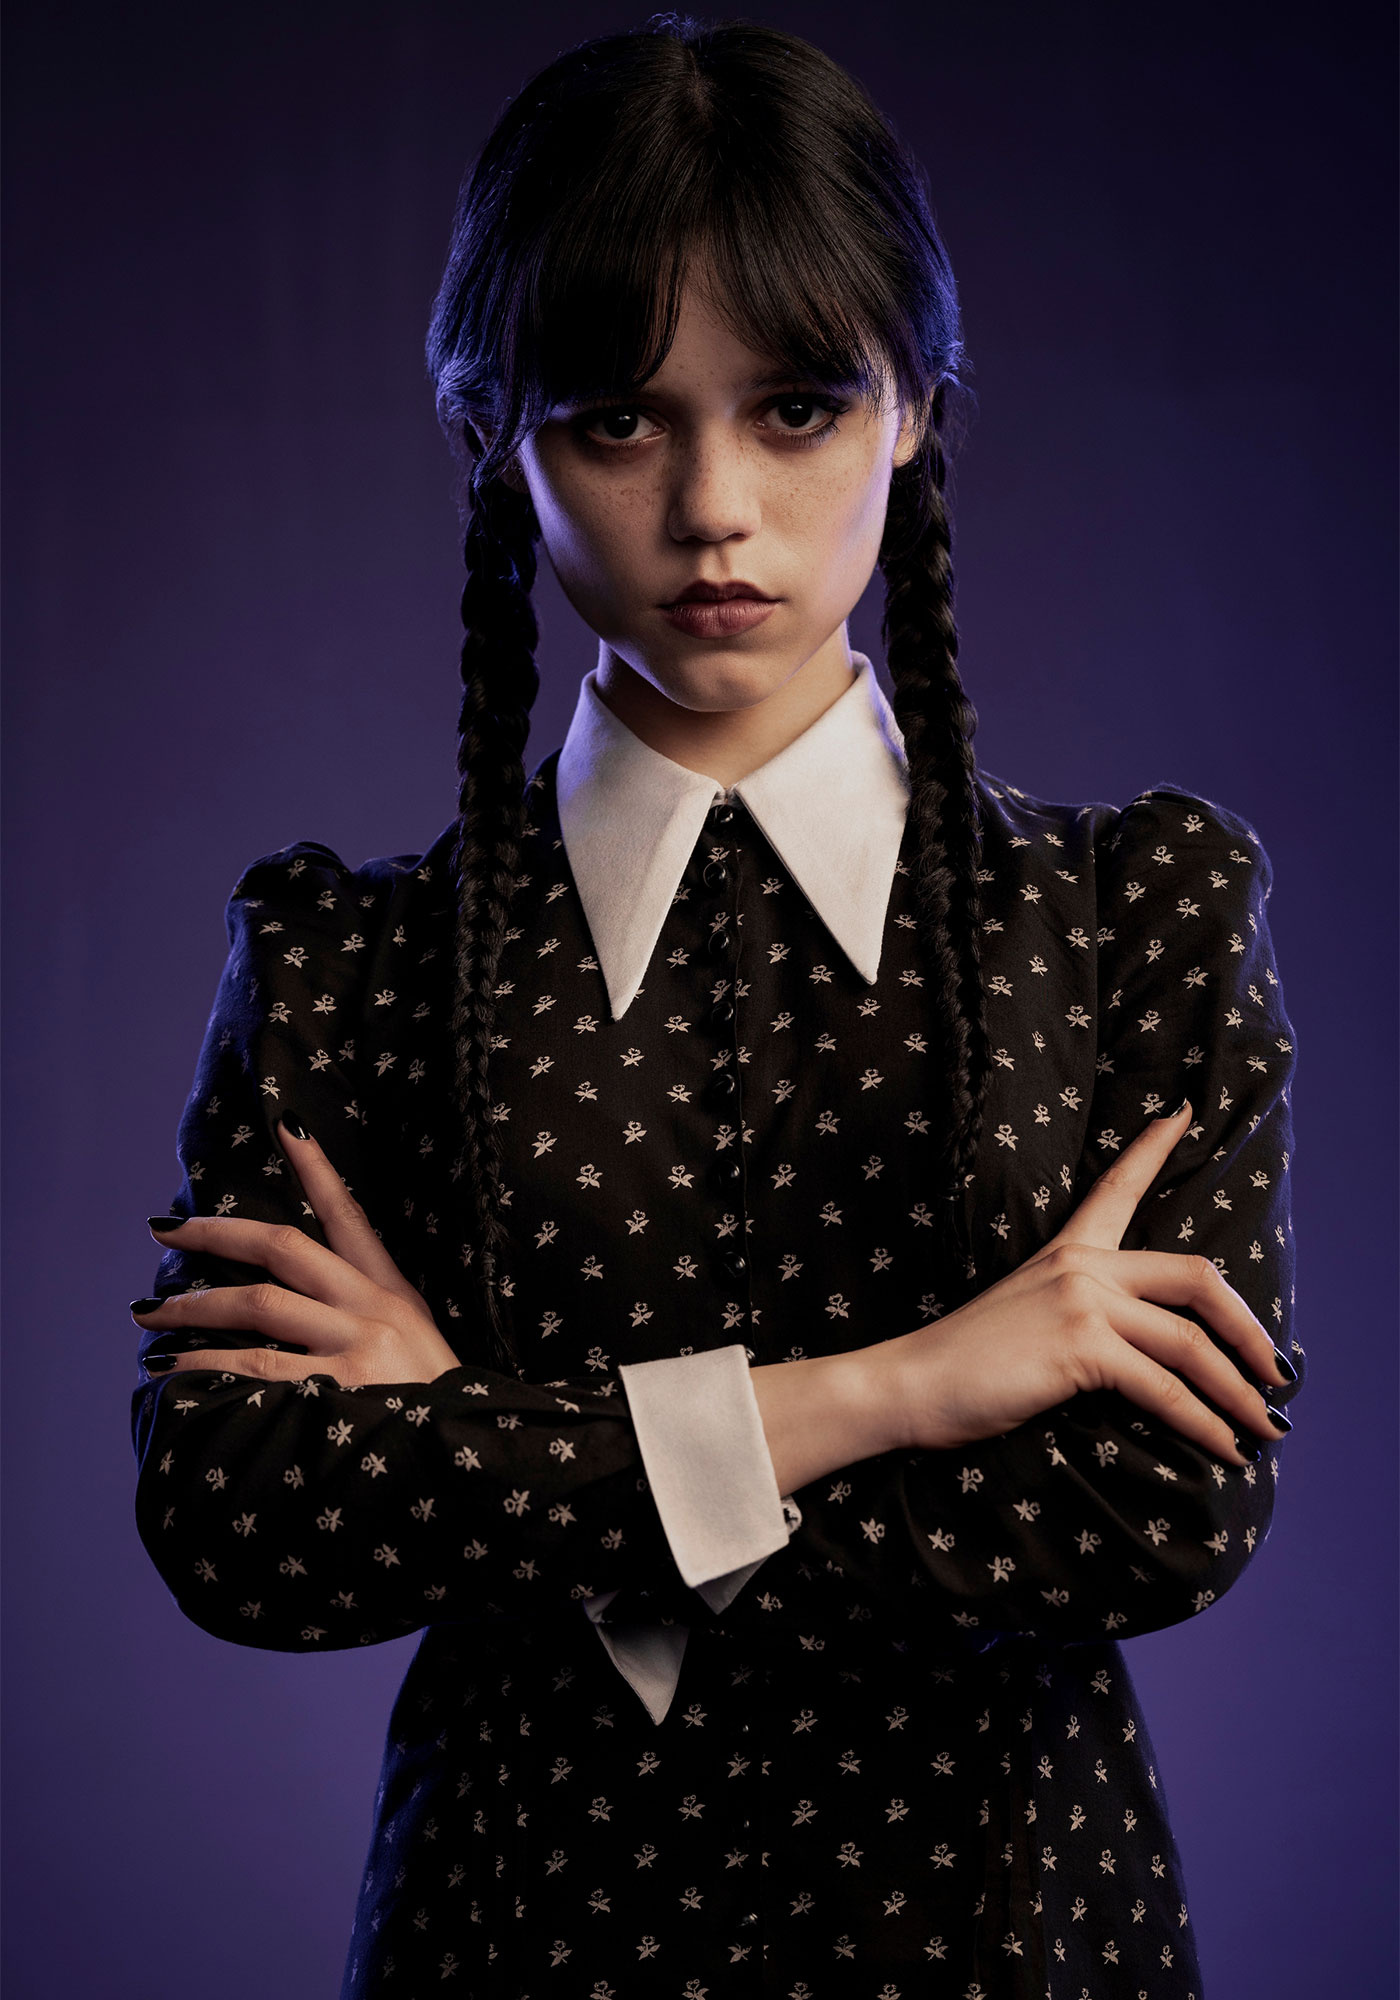 HD wallpaper, 1400X2000 Hd Phone, A Beloved Character, Mysterious And Macabre, Wednesday Addams, Samsung Hd Wednesday Addams Wallpaper